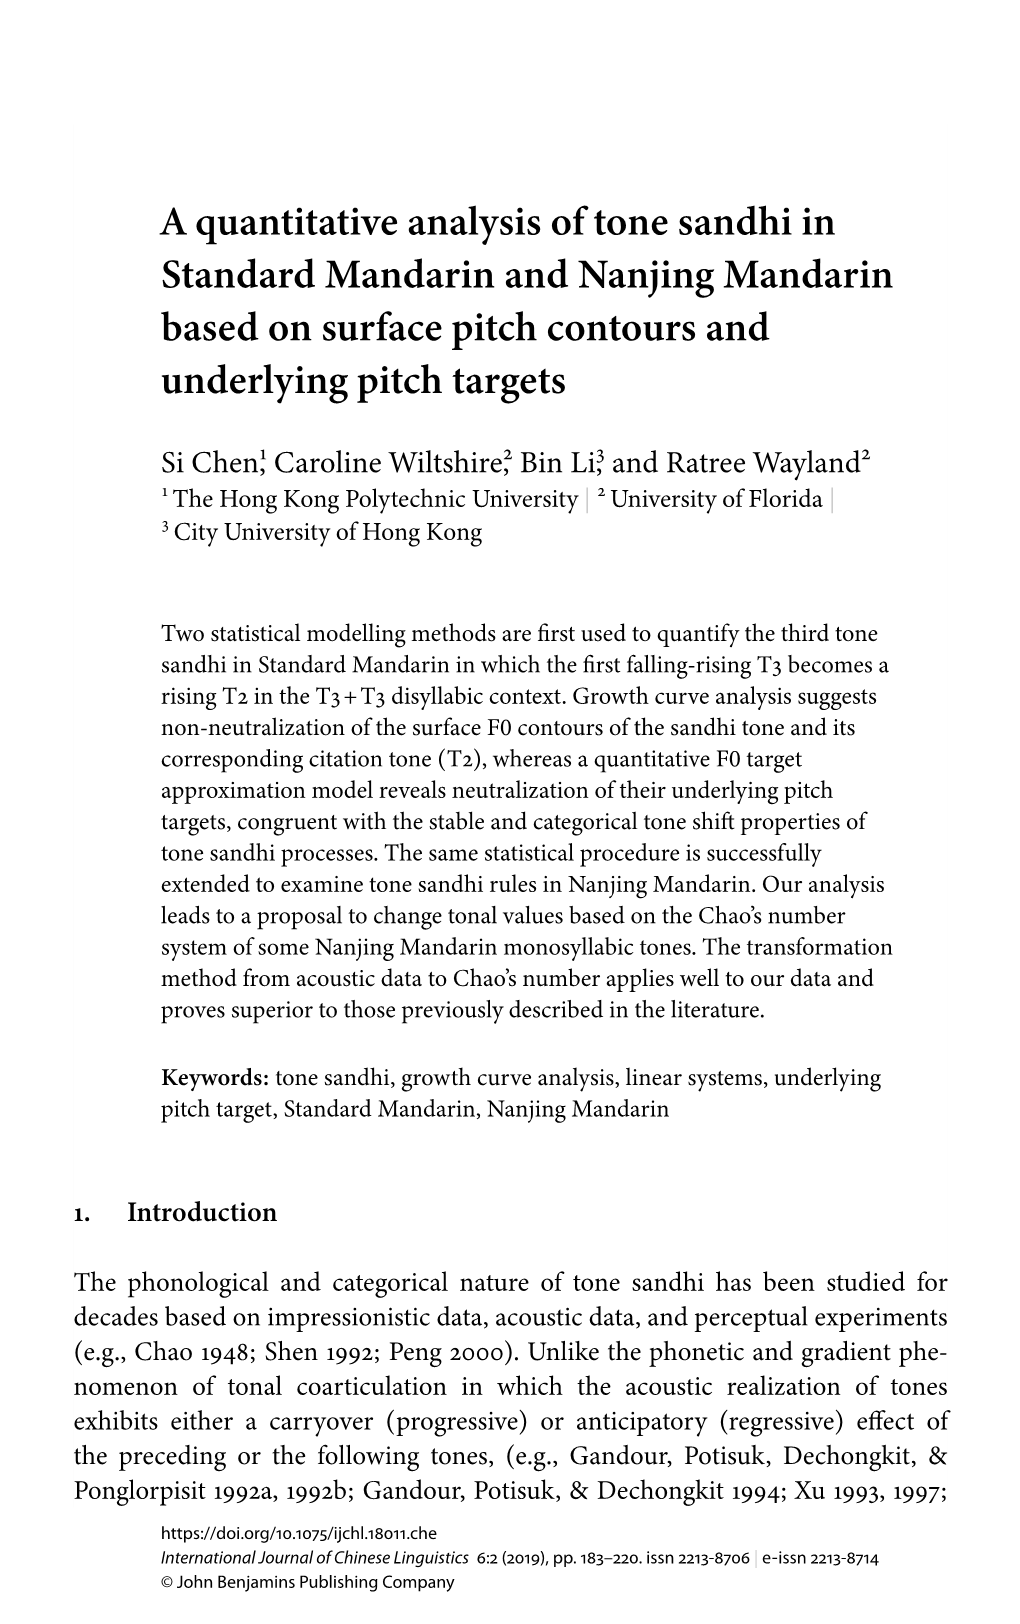 A Quantitative Analysis of Tone Sandhi in Standard Mandarin and Nanjing Mandarin Based on Surface Pitch Contours and Underlying Pitch Targets